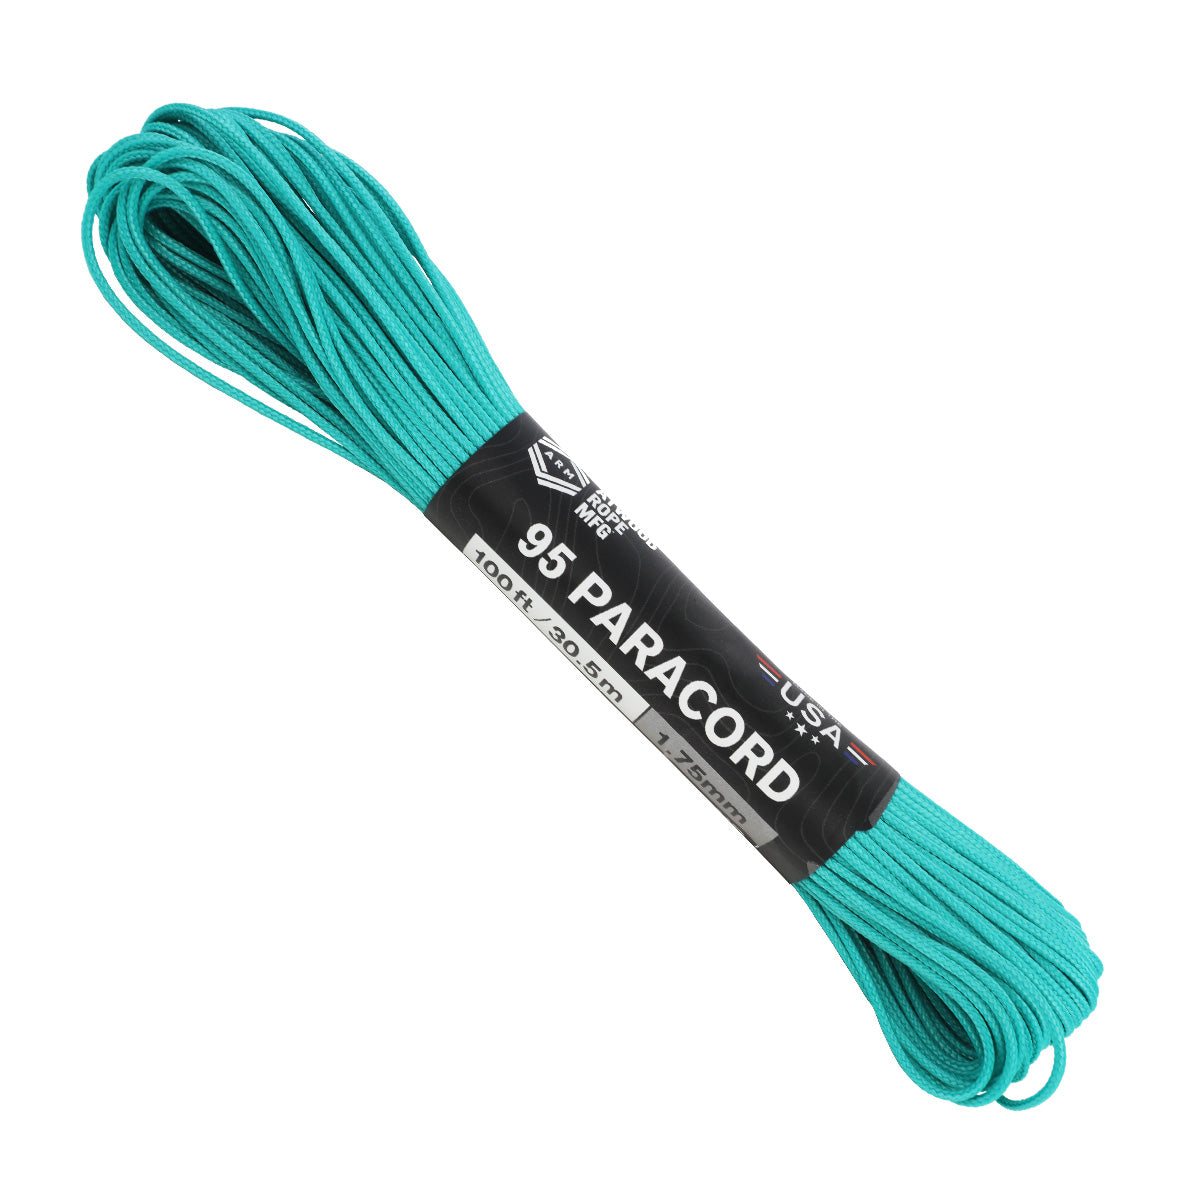 95 Paracord - Teal – Atwood Rope MFG